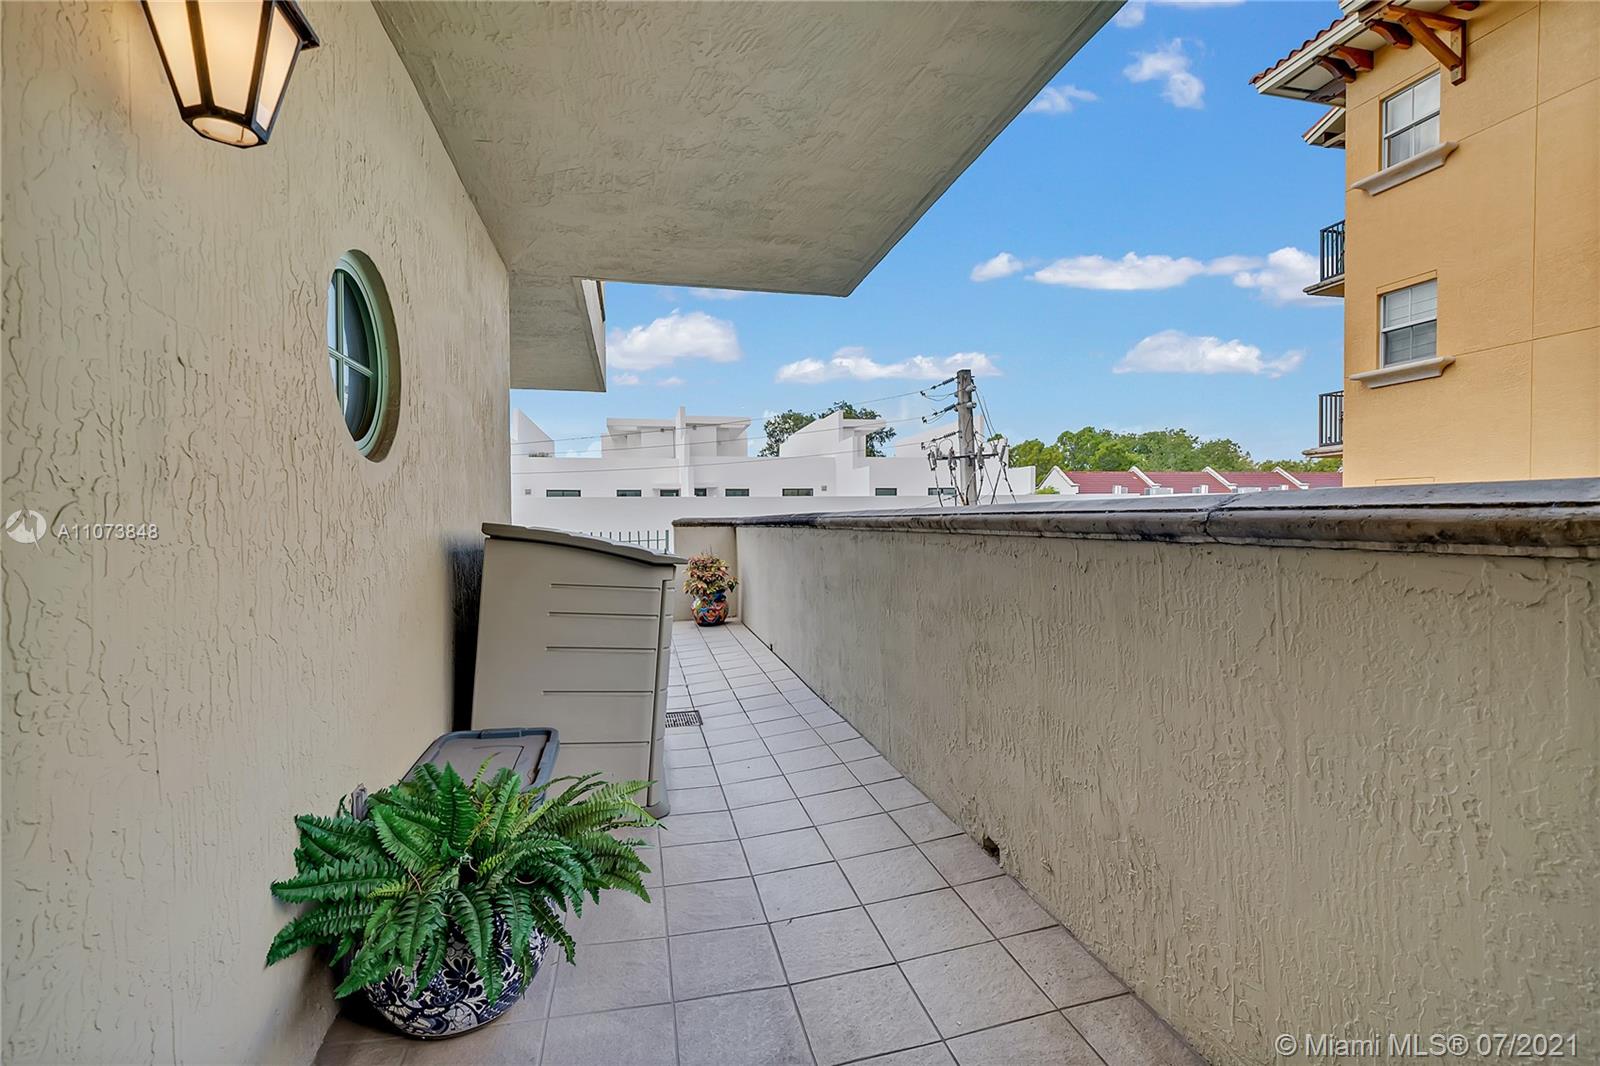 Photo 22 of The New French Village Co Apt 303 in Coral Gables - MLS A11073848